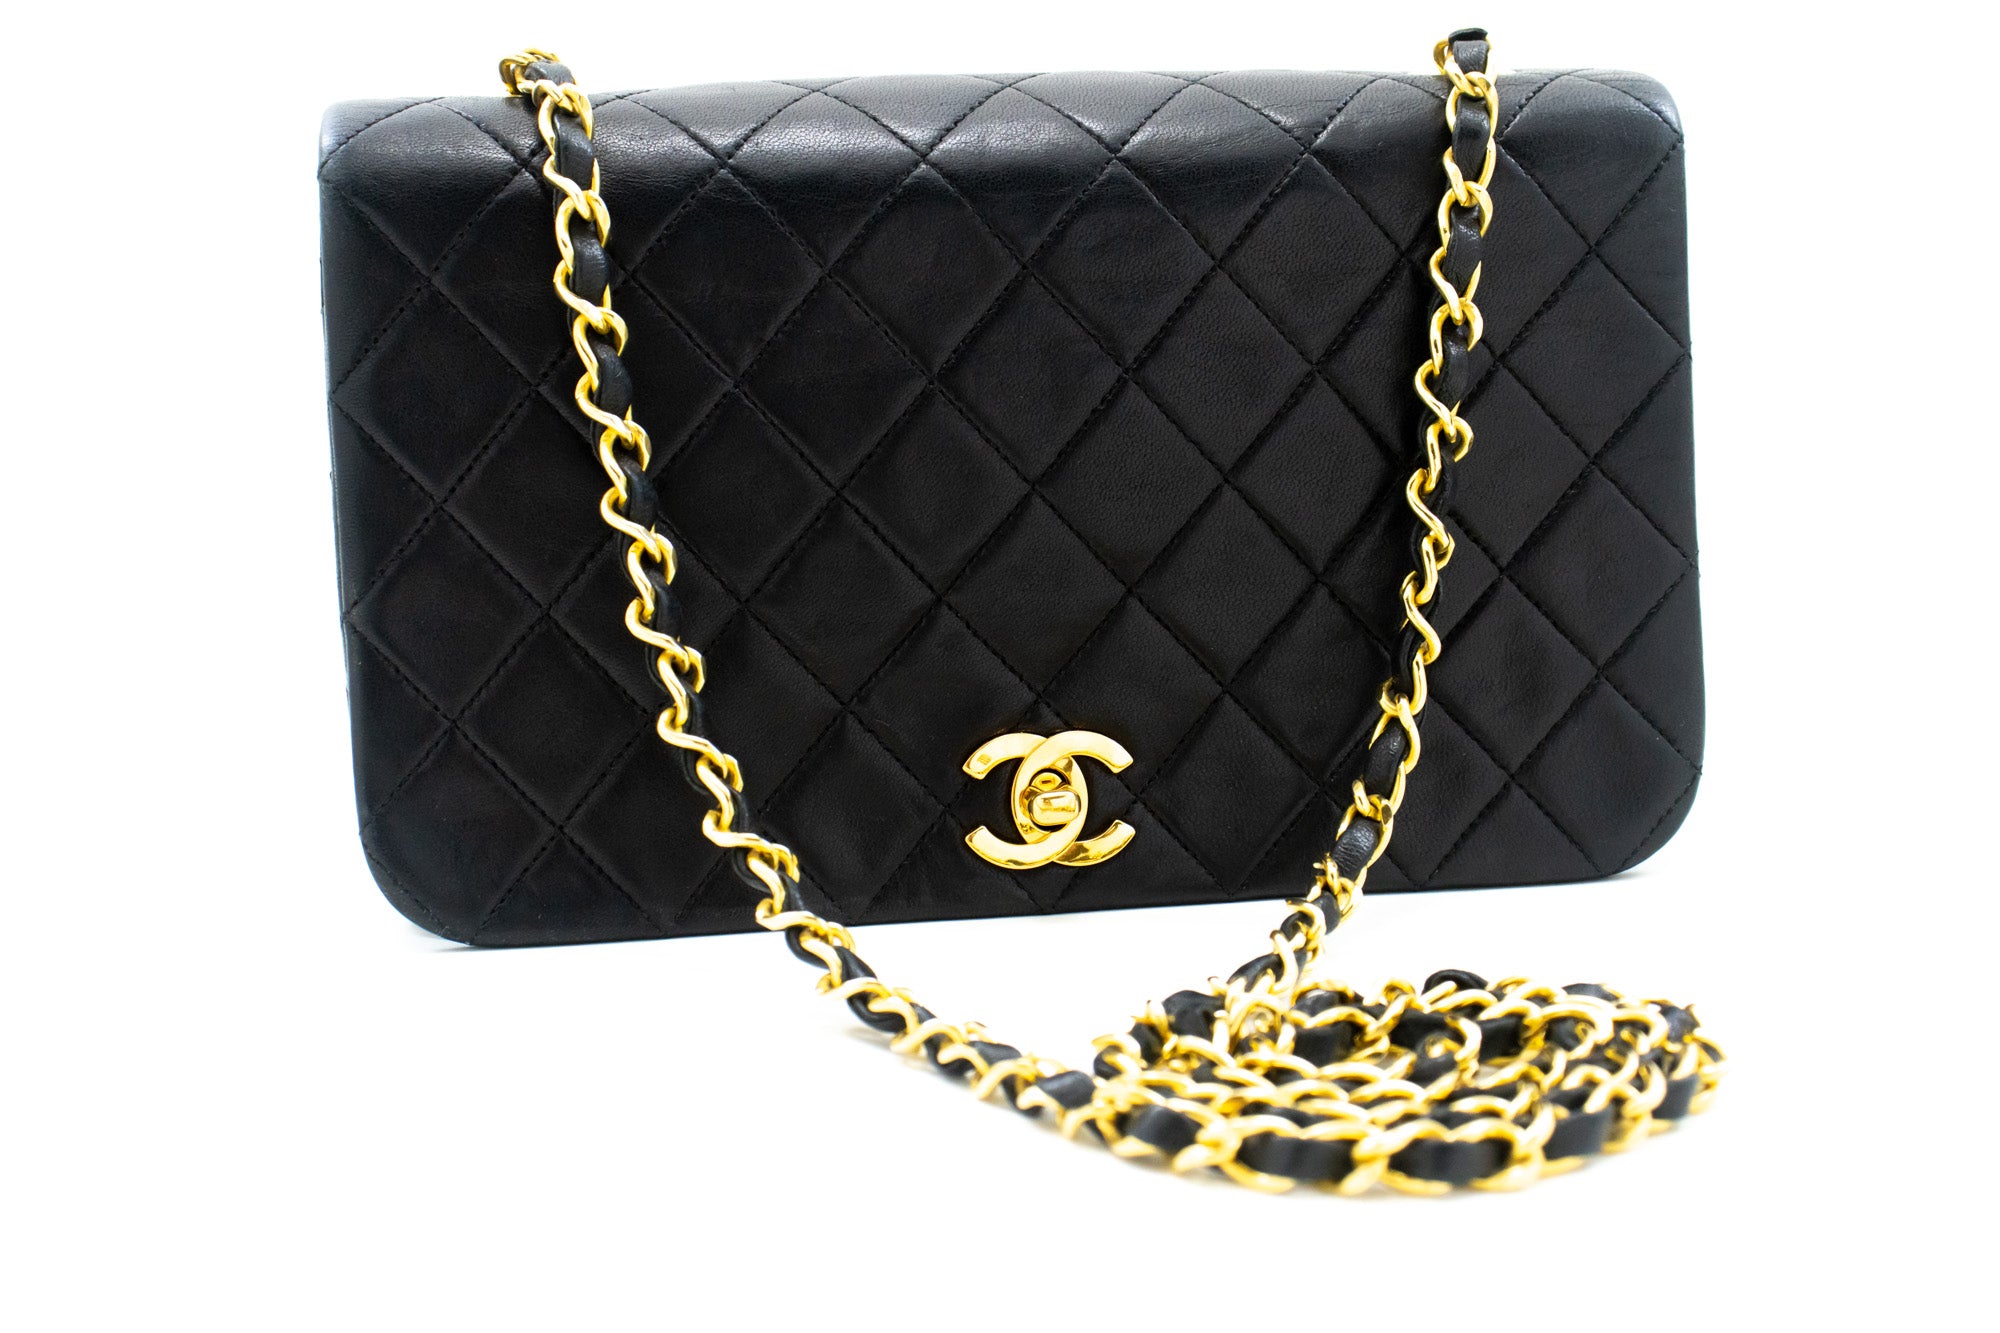 BRAND NEW ! Chanel Black Caviar Classic Flap Phone Holder with Chain Gold  Hardware (U8UTGLT6) - The Attic Place